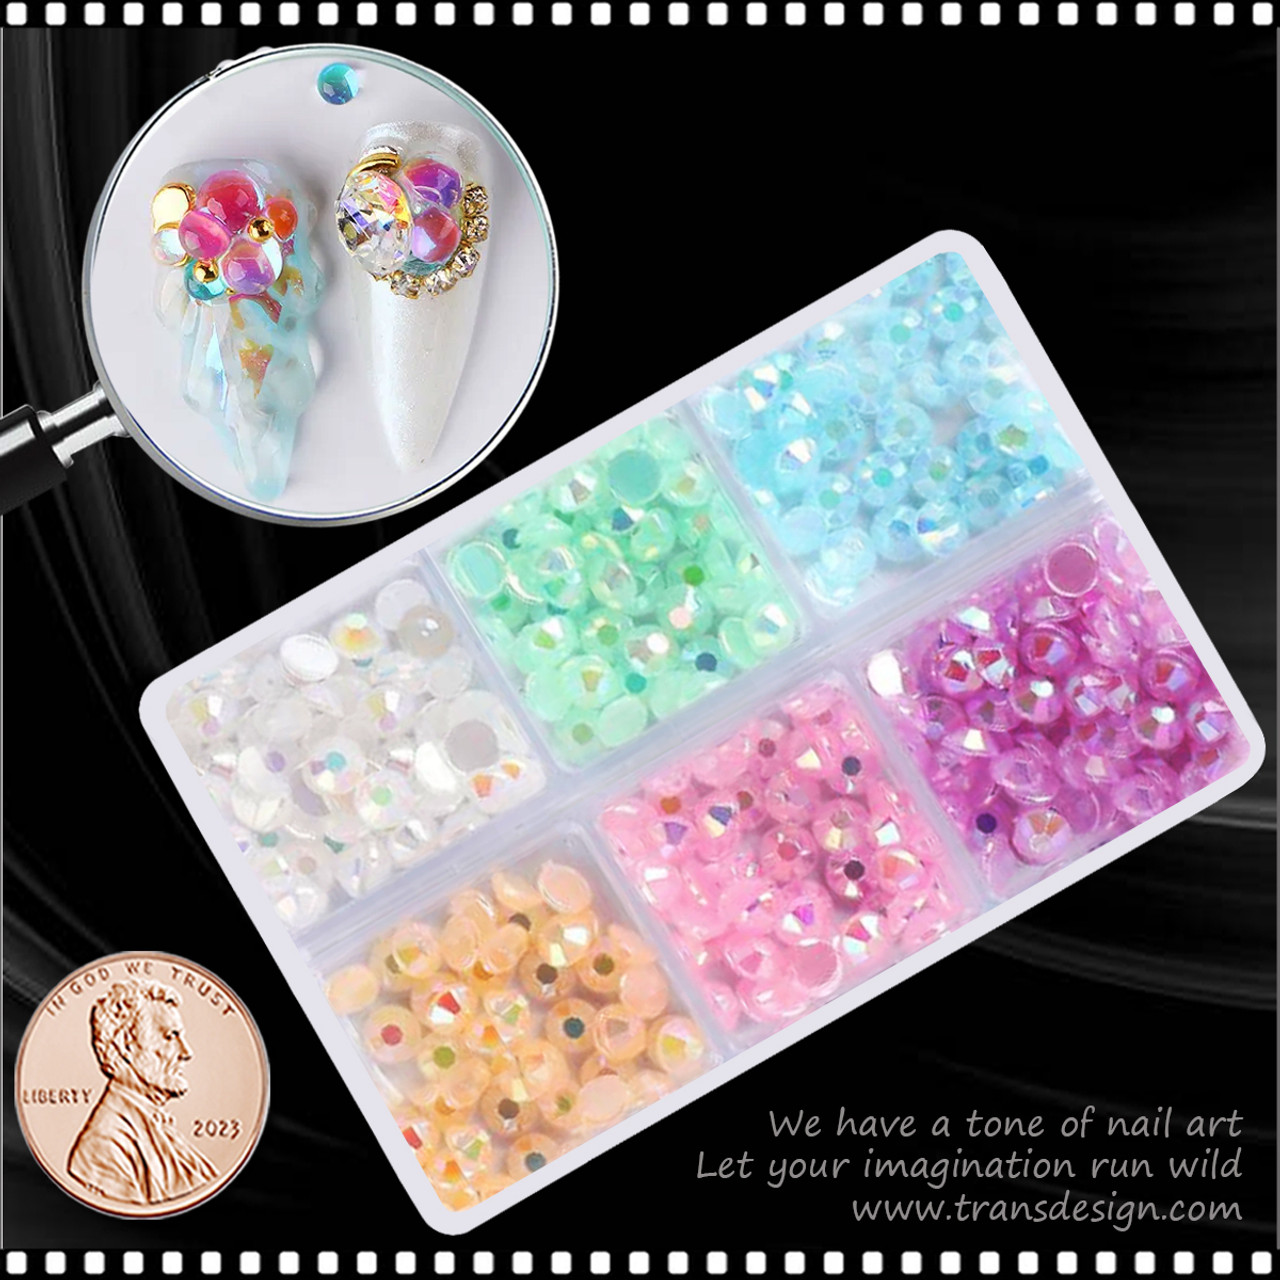 DIY - RHINESTONE APPLICATOR AND BEDAZZLER KIT - HOW TO APPLY STEP